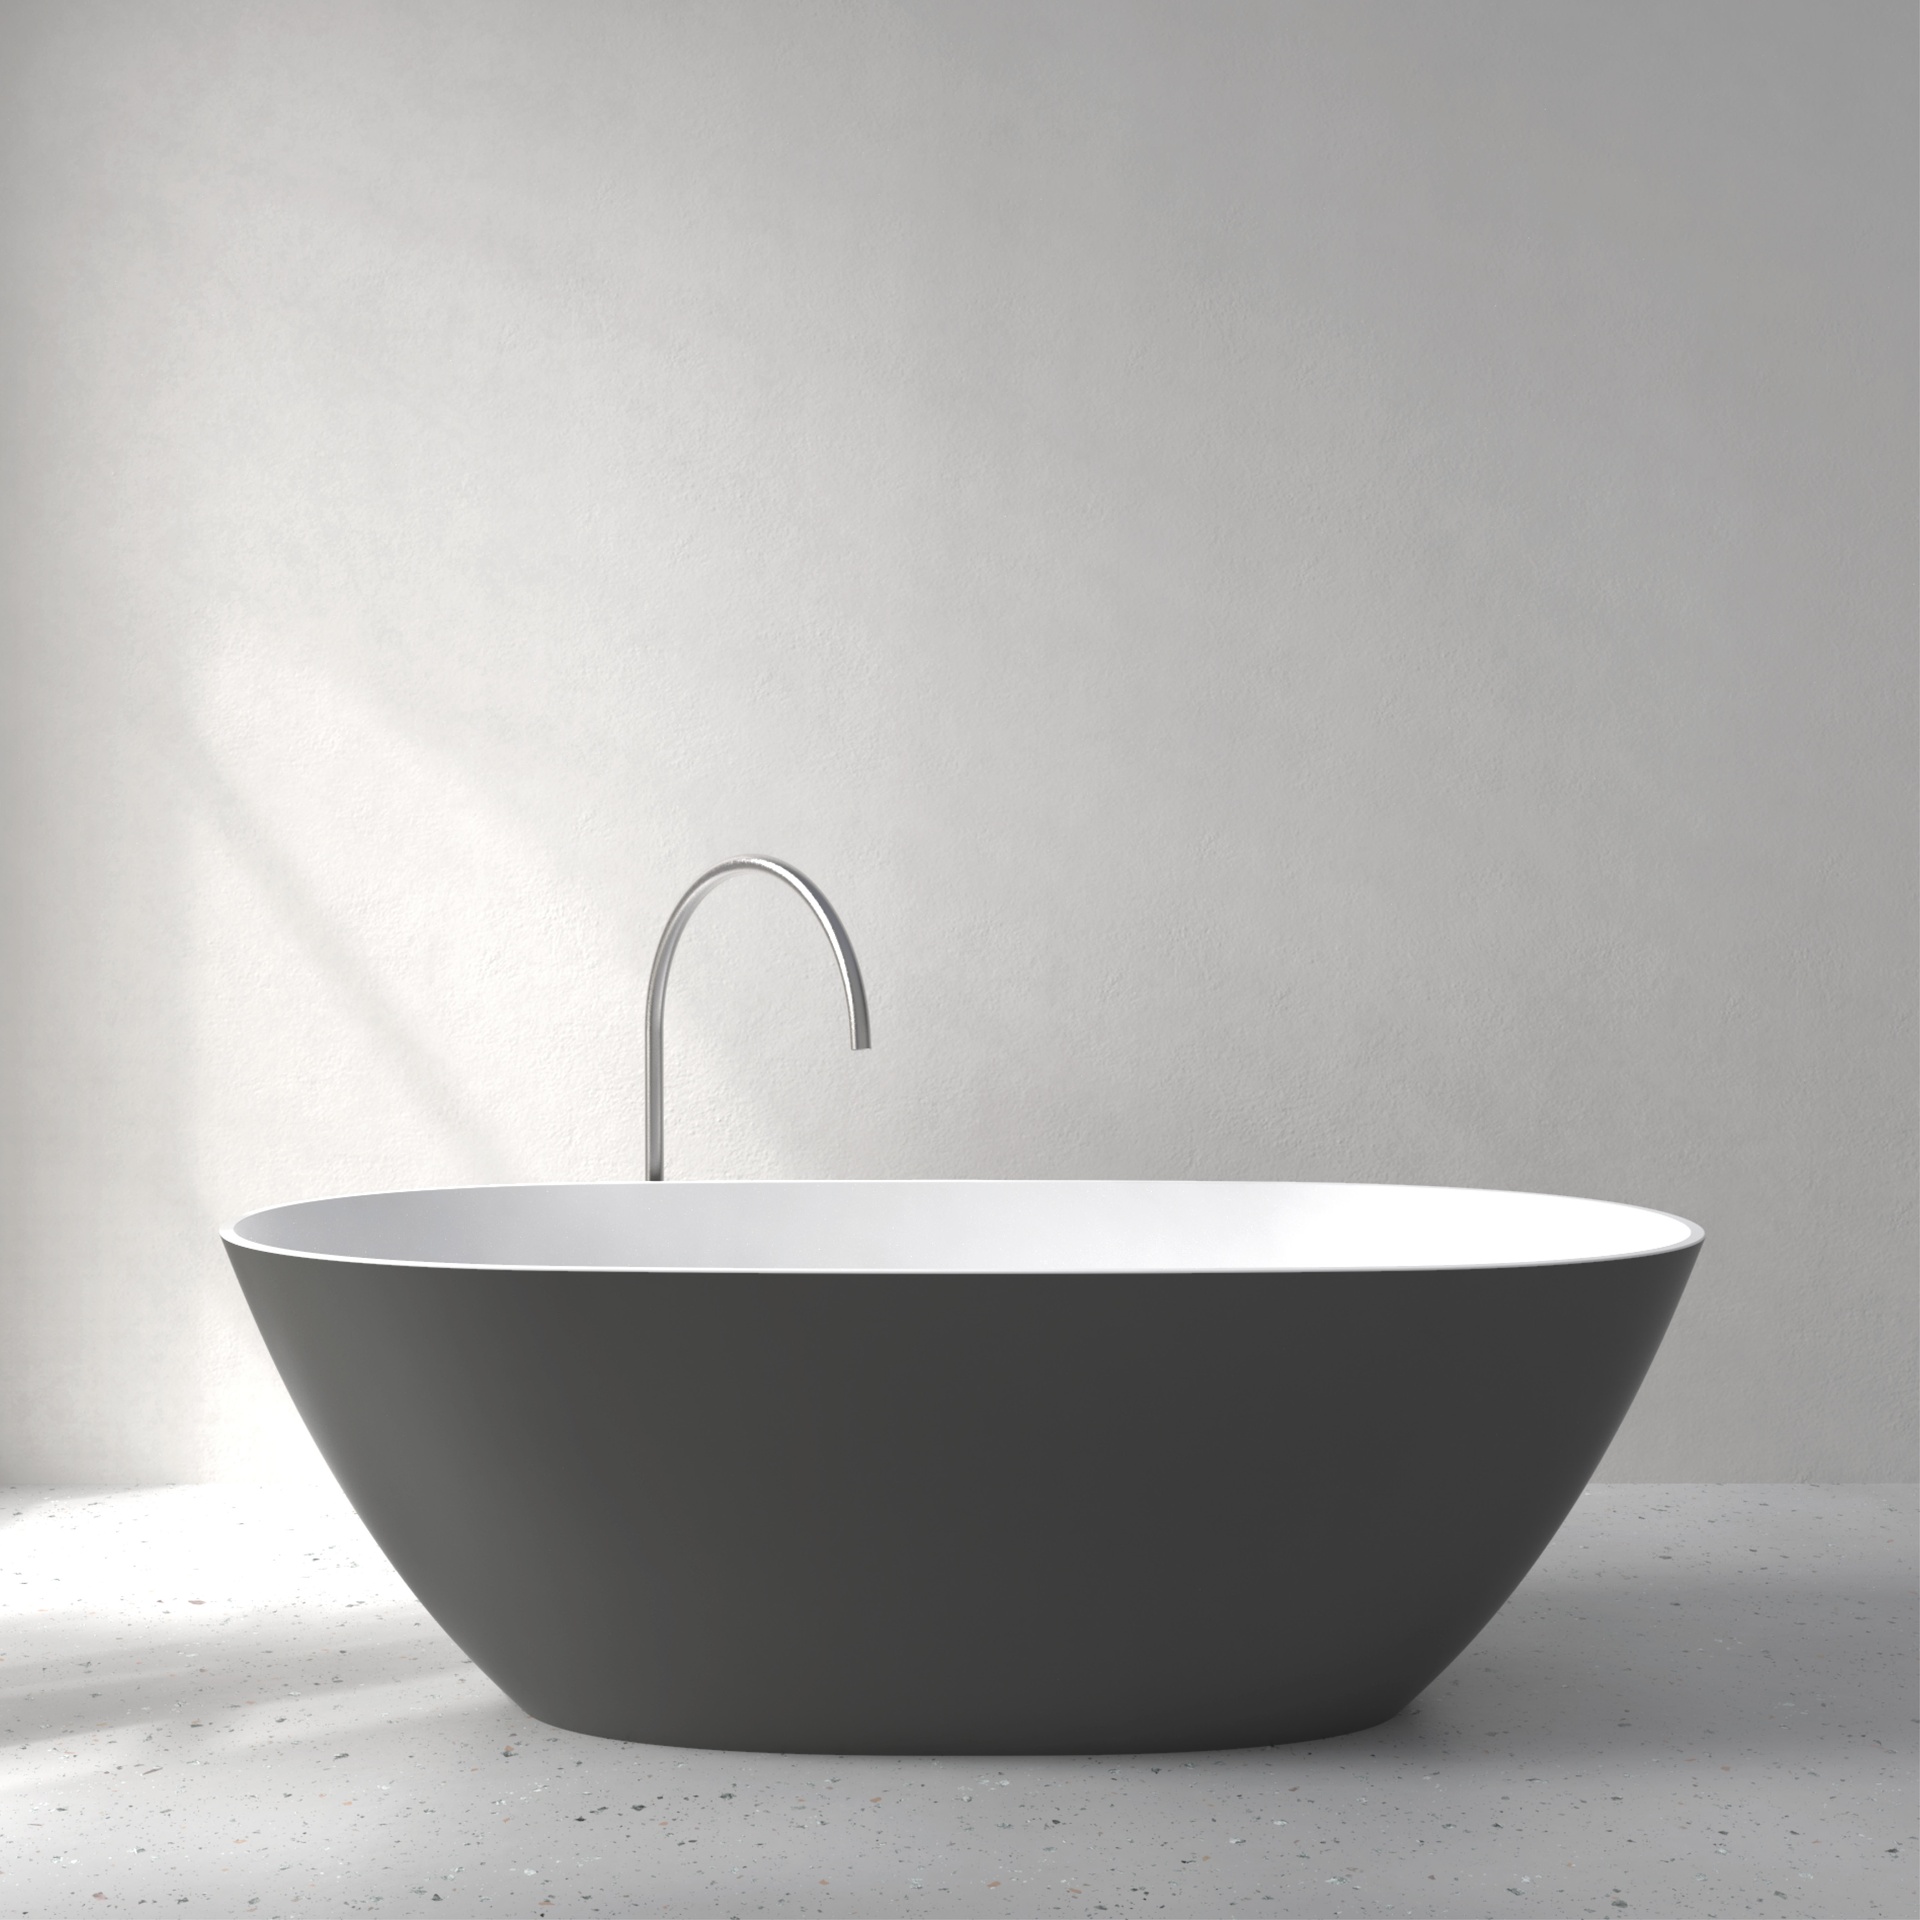 [FMU04-SAGREY] Muse bath with Soft Touch (Anthracite Grey)